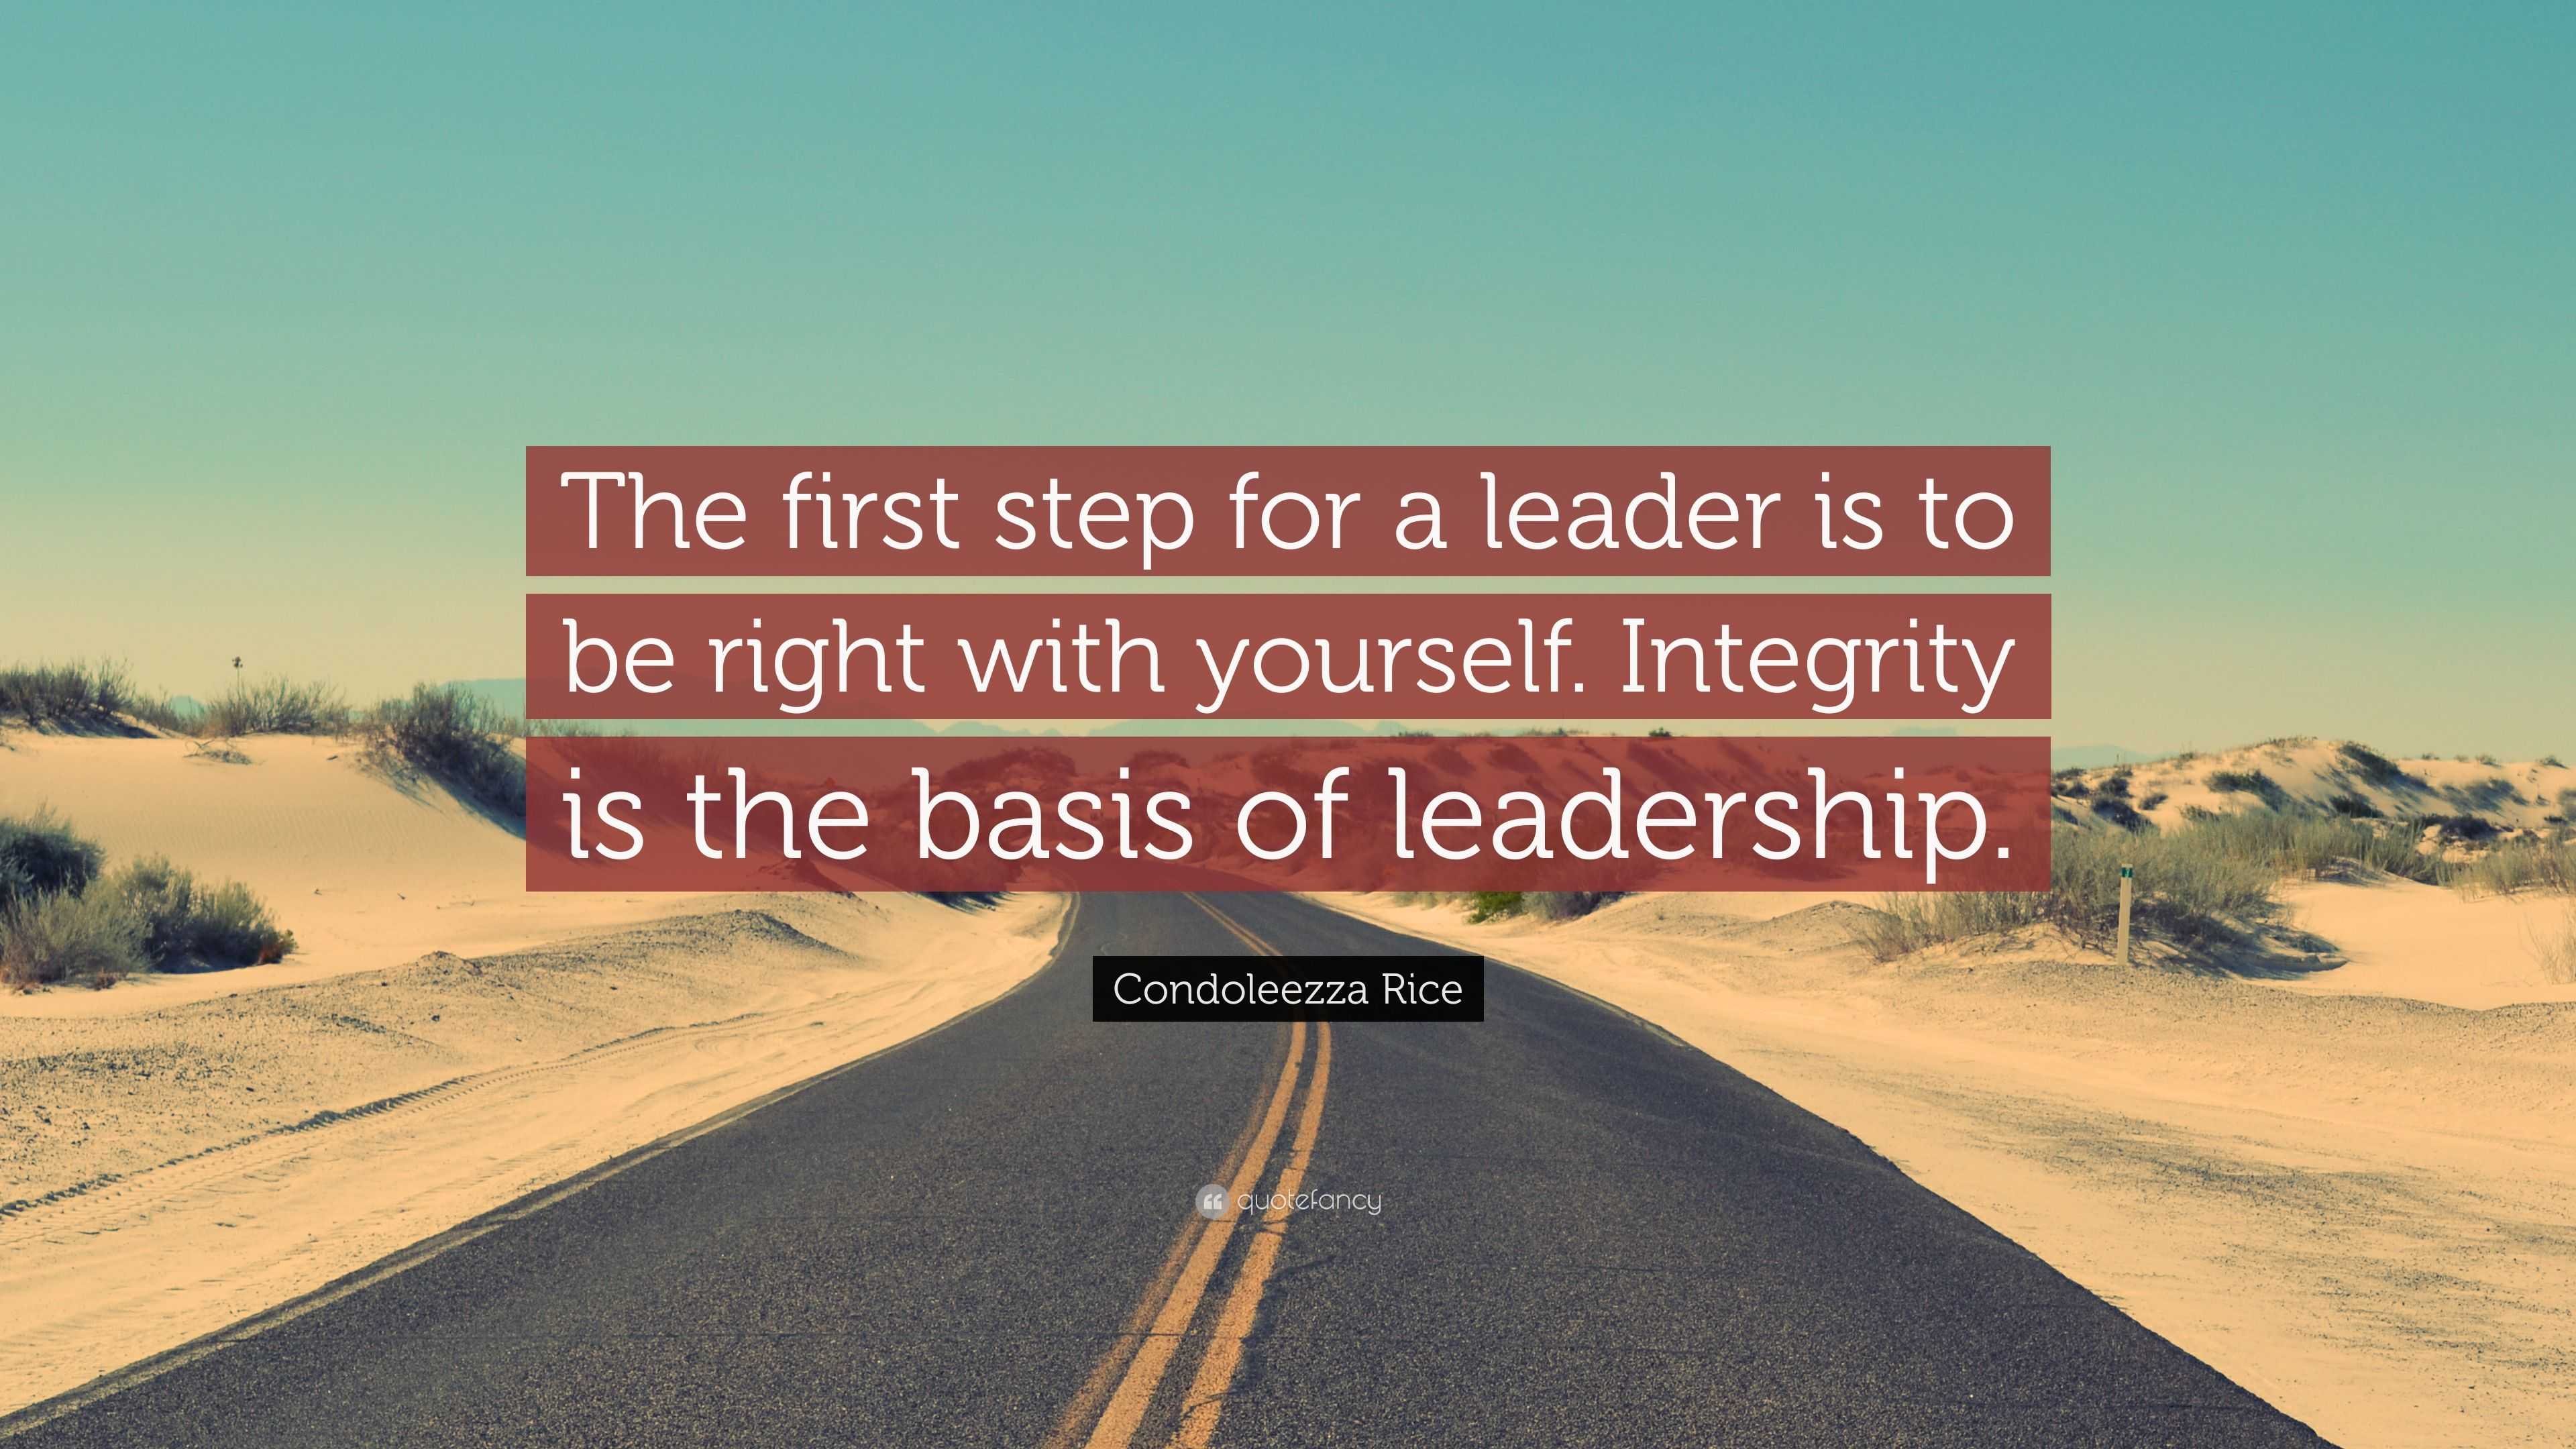 Condoleezza Rice Quote: “The first step for a leader is to be right ...